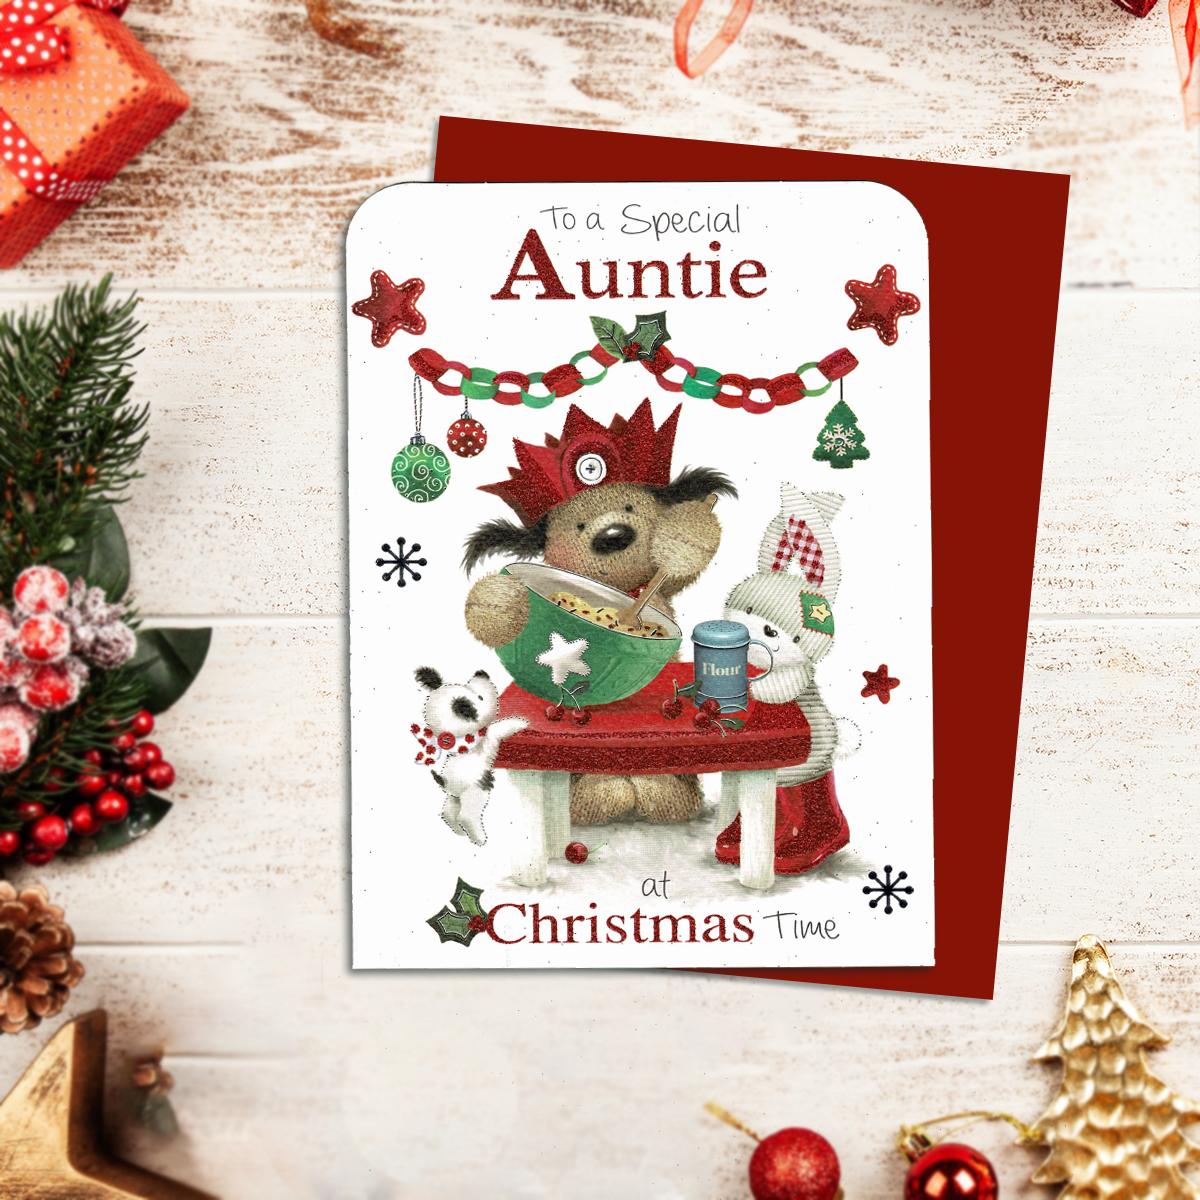 Special Auntie Christmas Card Alongside Its Red Envelope